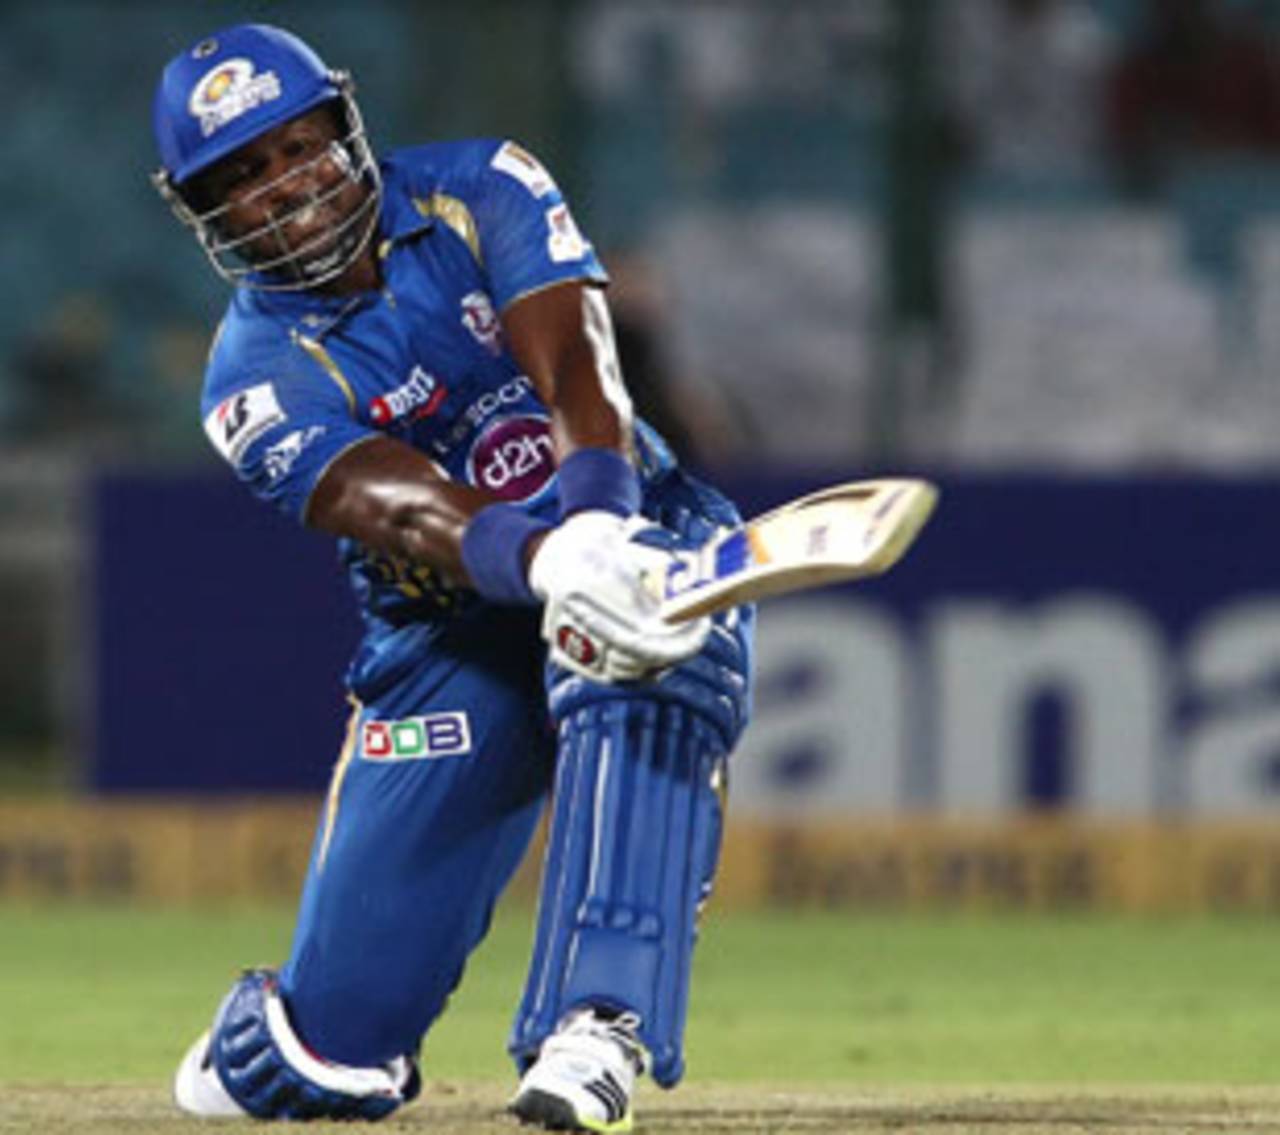 Dwayne Smith blasted 63 off just 47, Lions v Mumbai Indians, Group A, Champions League 2013, Jaipur, Sep 27, 2013